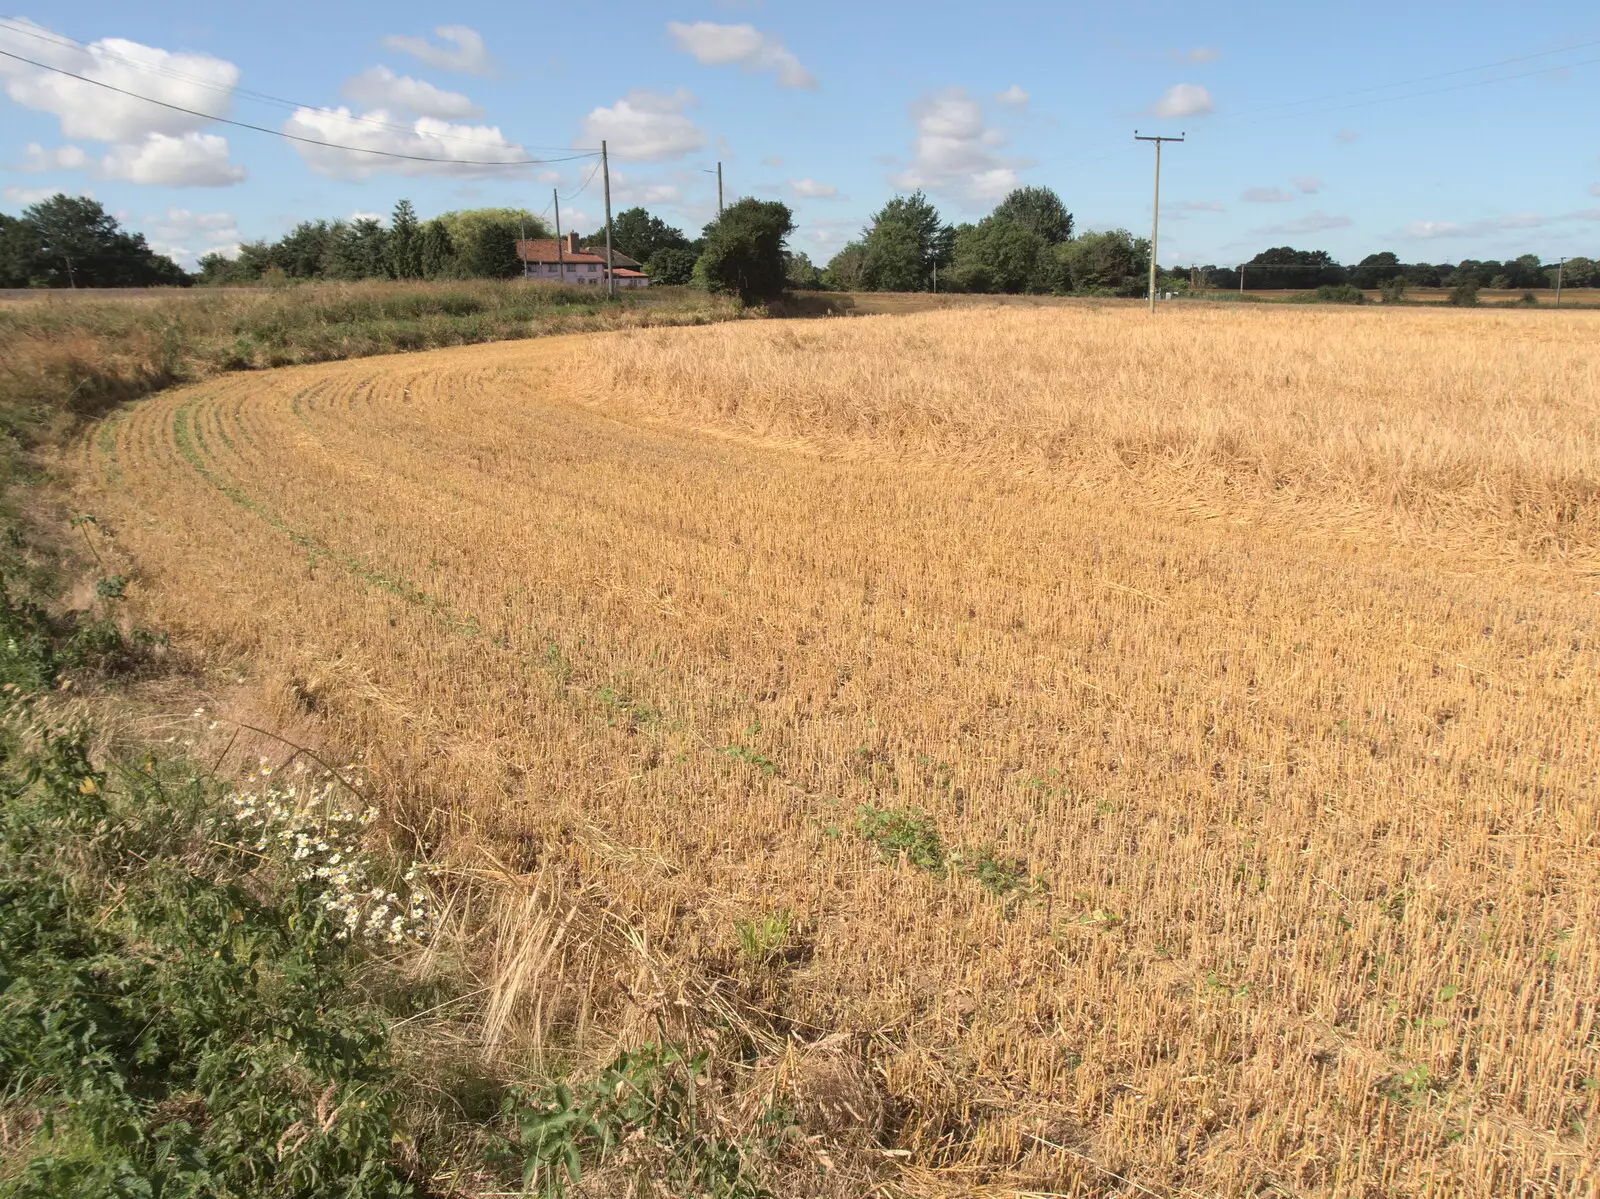 The wheat is partly-harvested over at Thrandeston, from Meg-fest, and Sean Visits, Bressingham and Brome, Suffolk - 1st August 2021